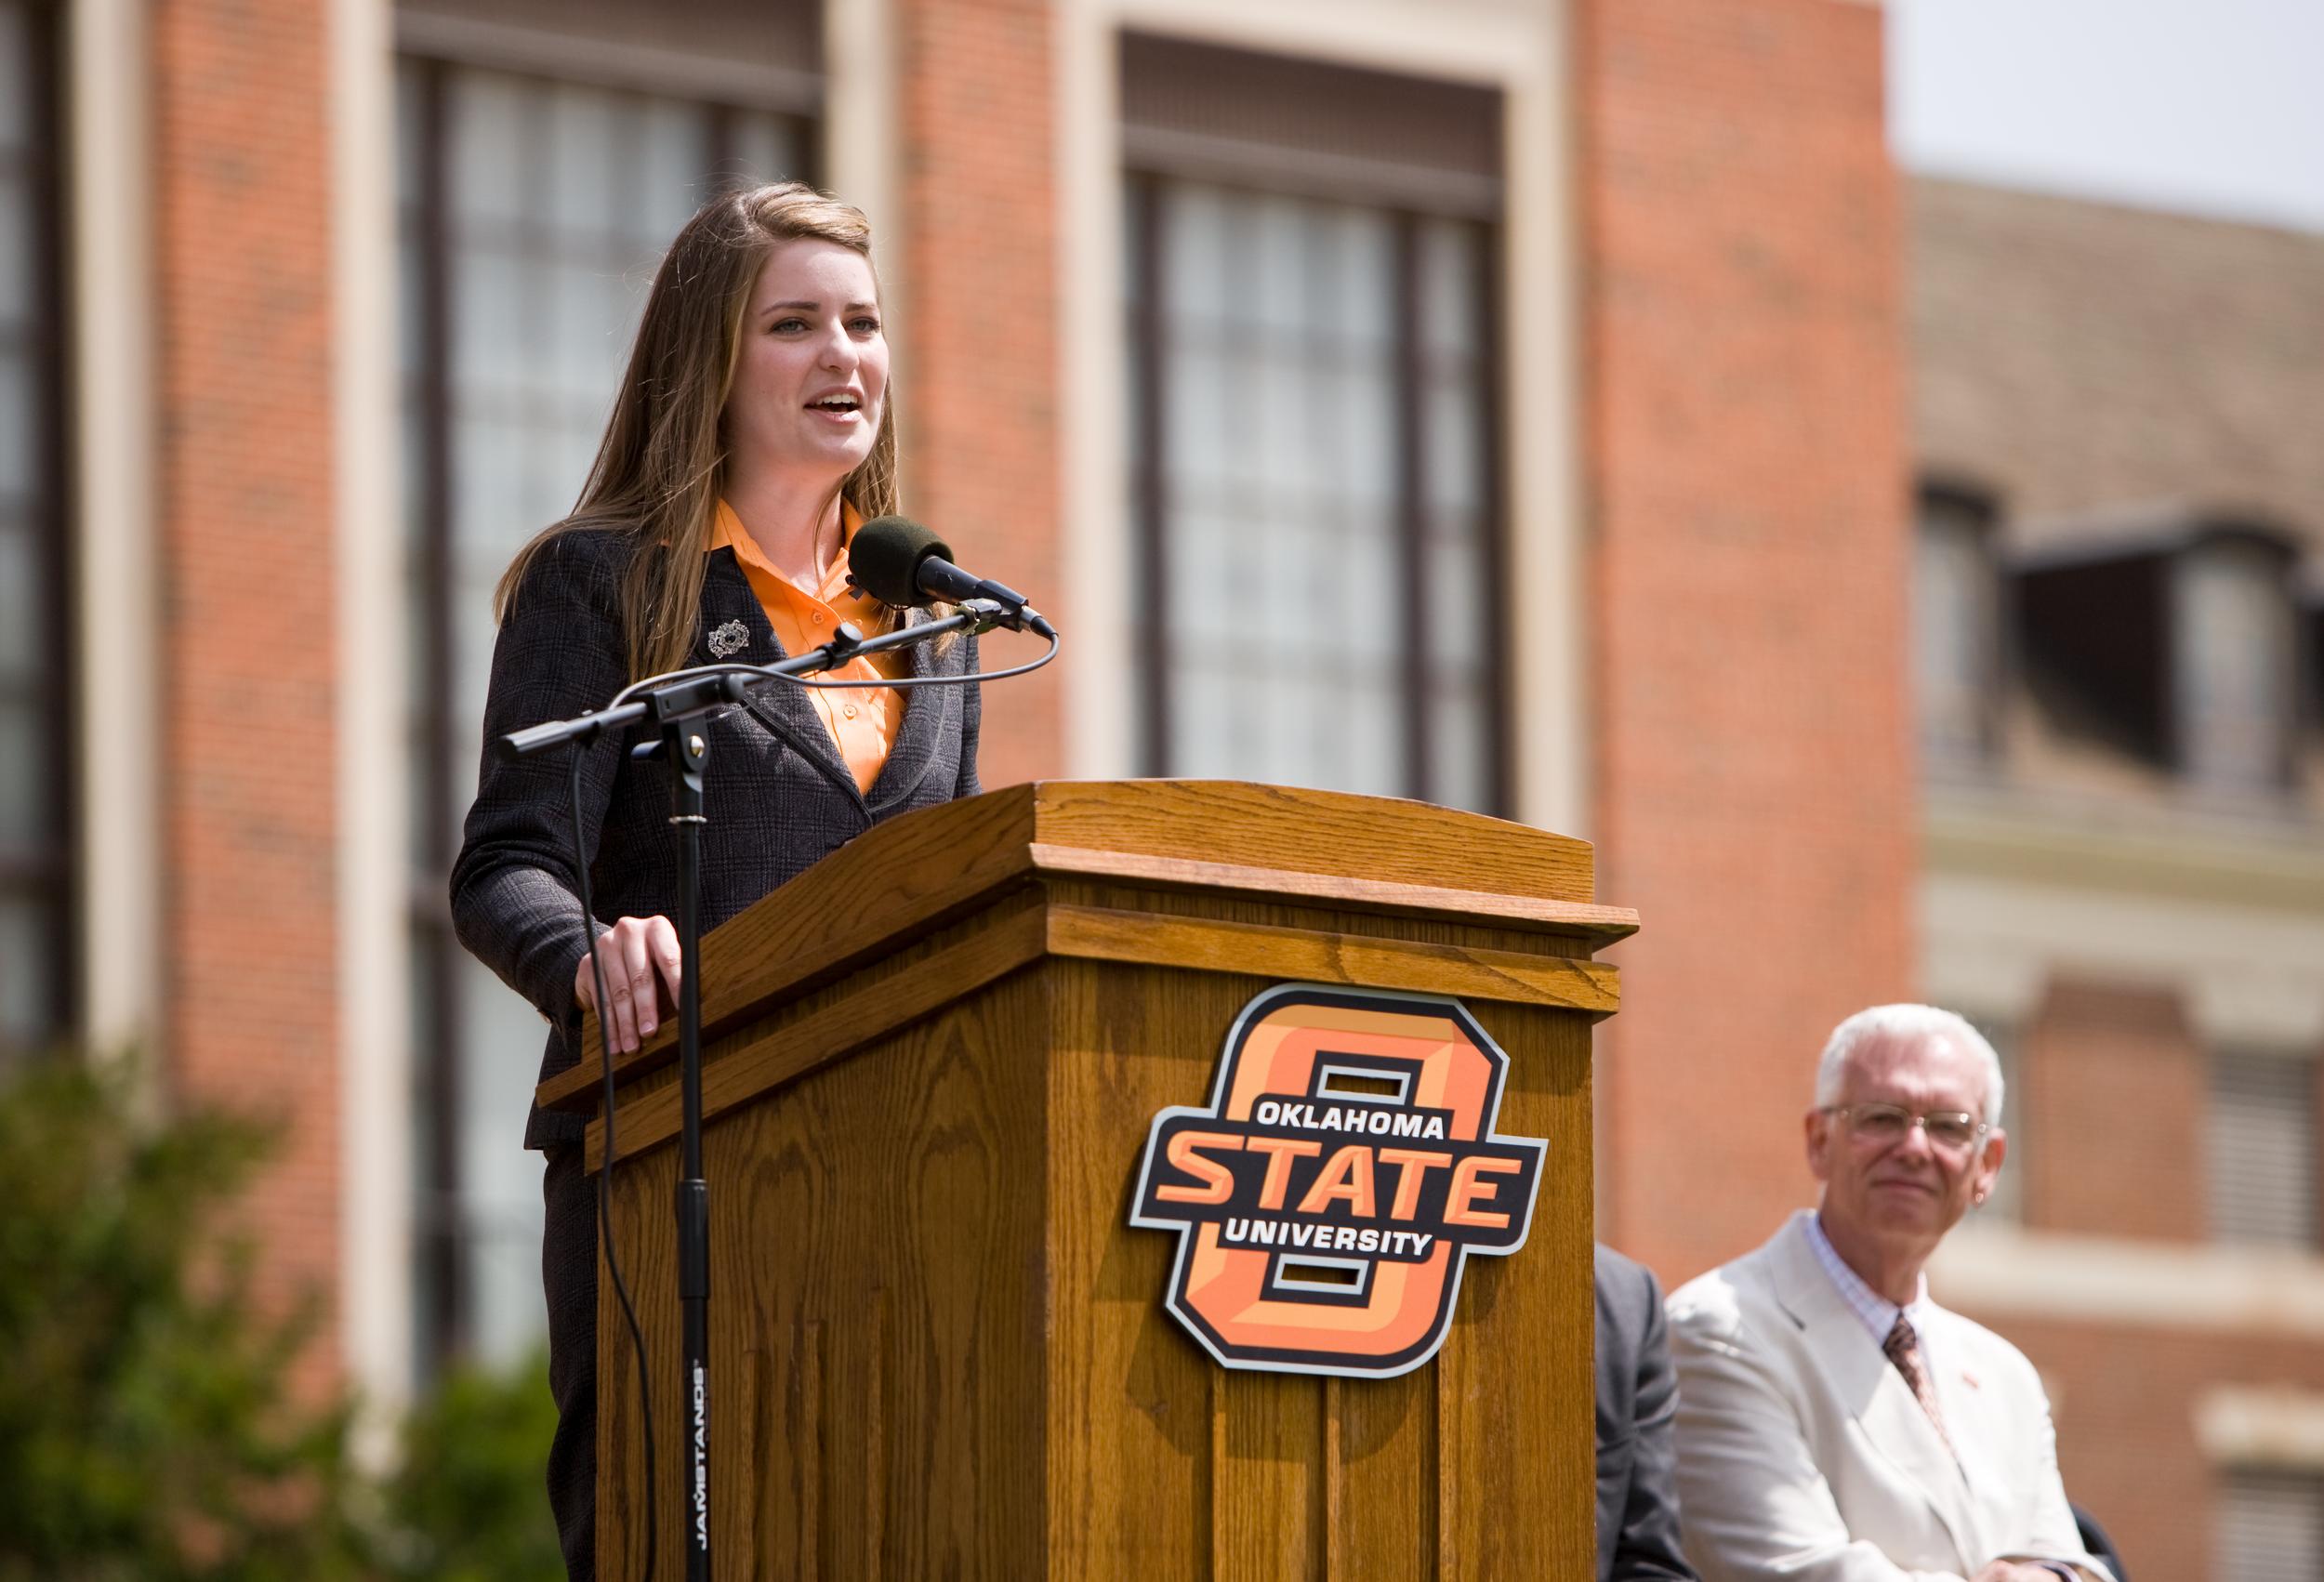 A young woman speaks at a lectern with an Oklahoma State logo on the front.